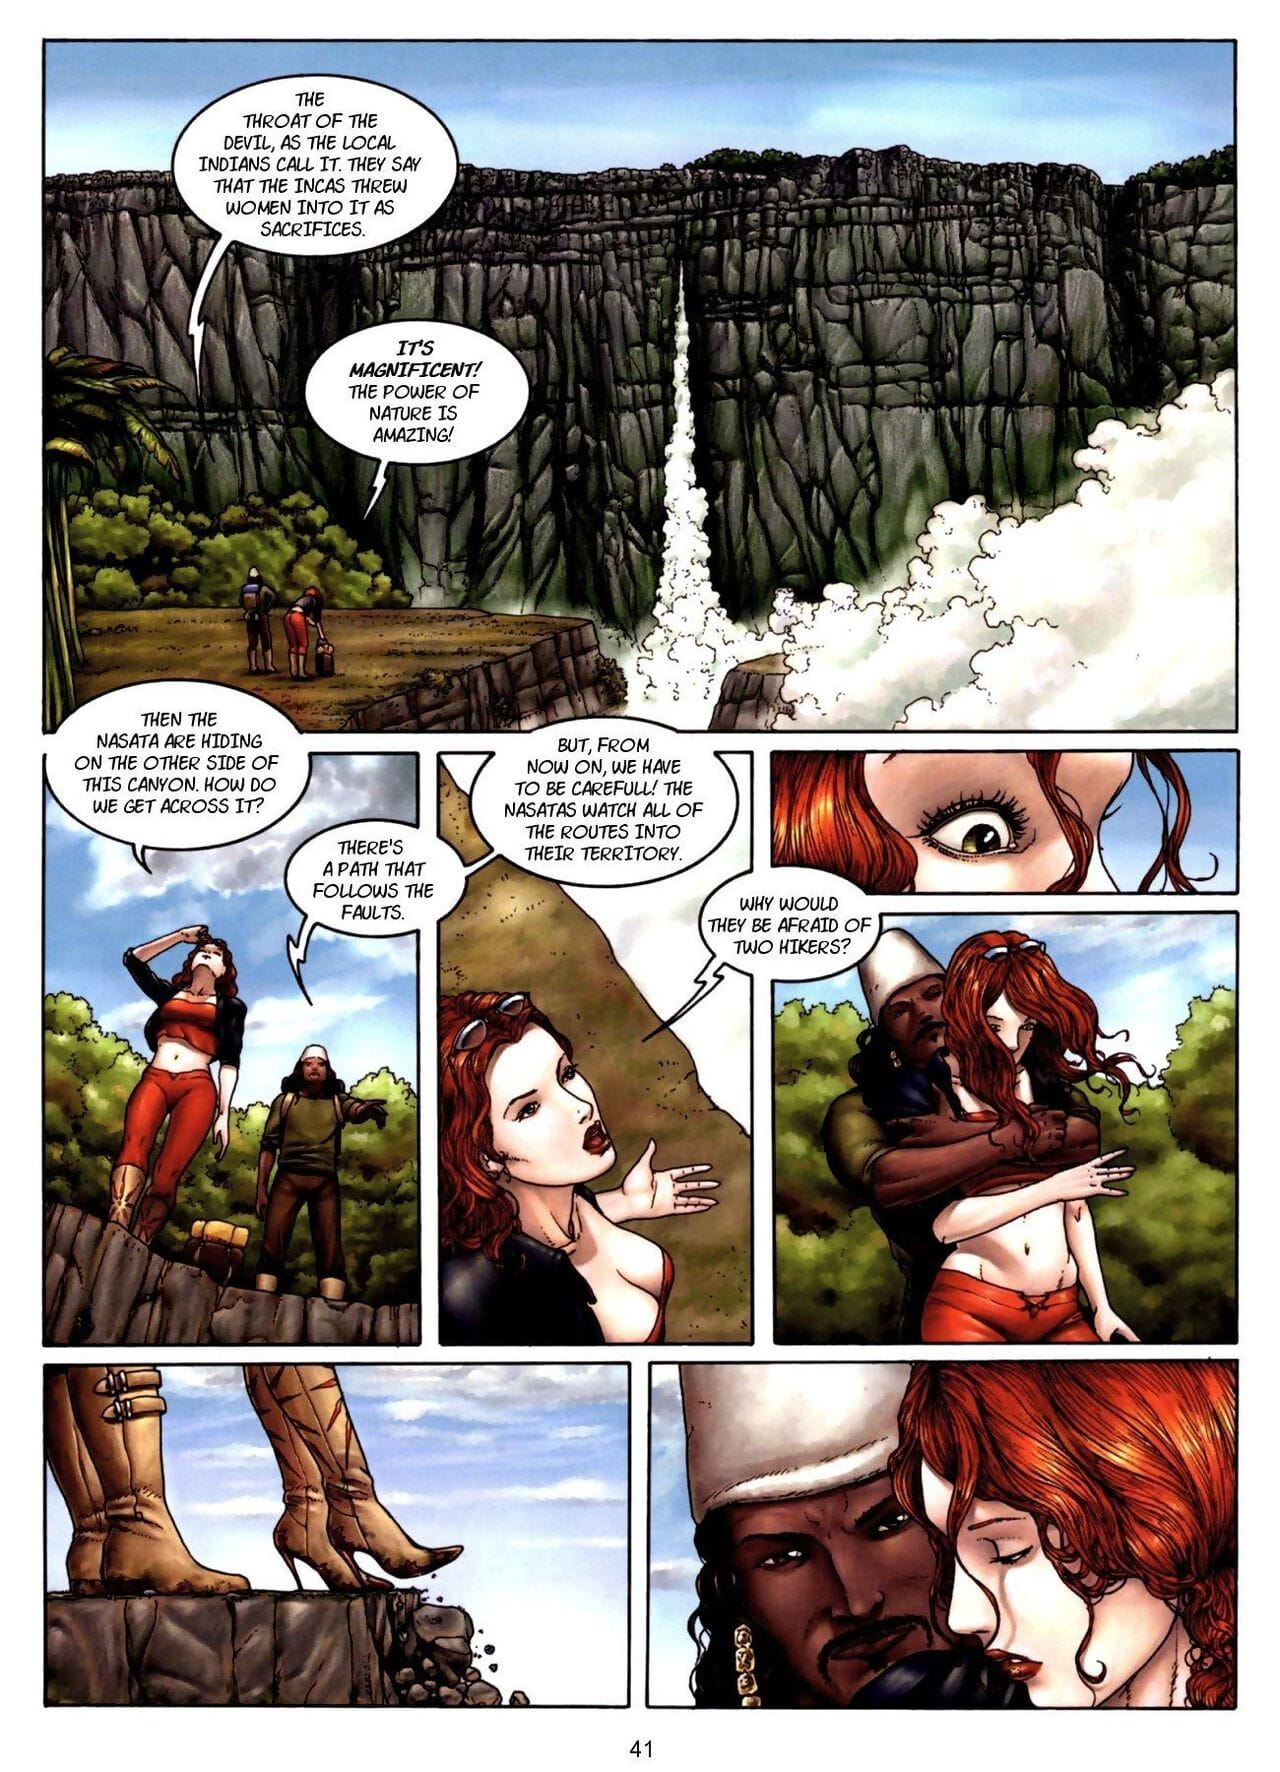 Sophia - Book 1: Old Trouble - part 2 page 1